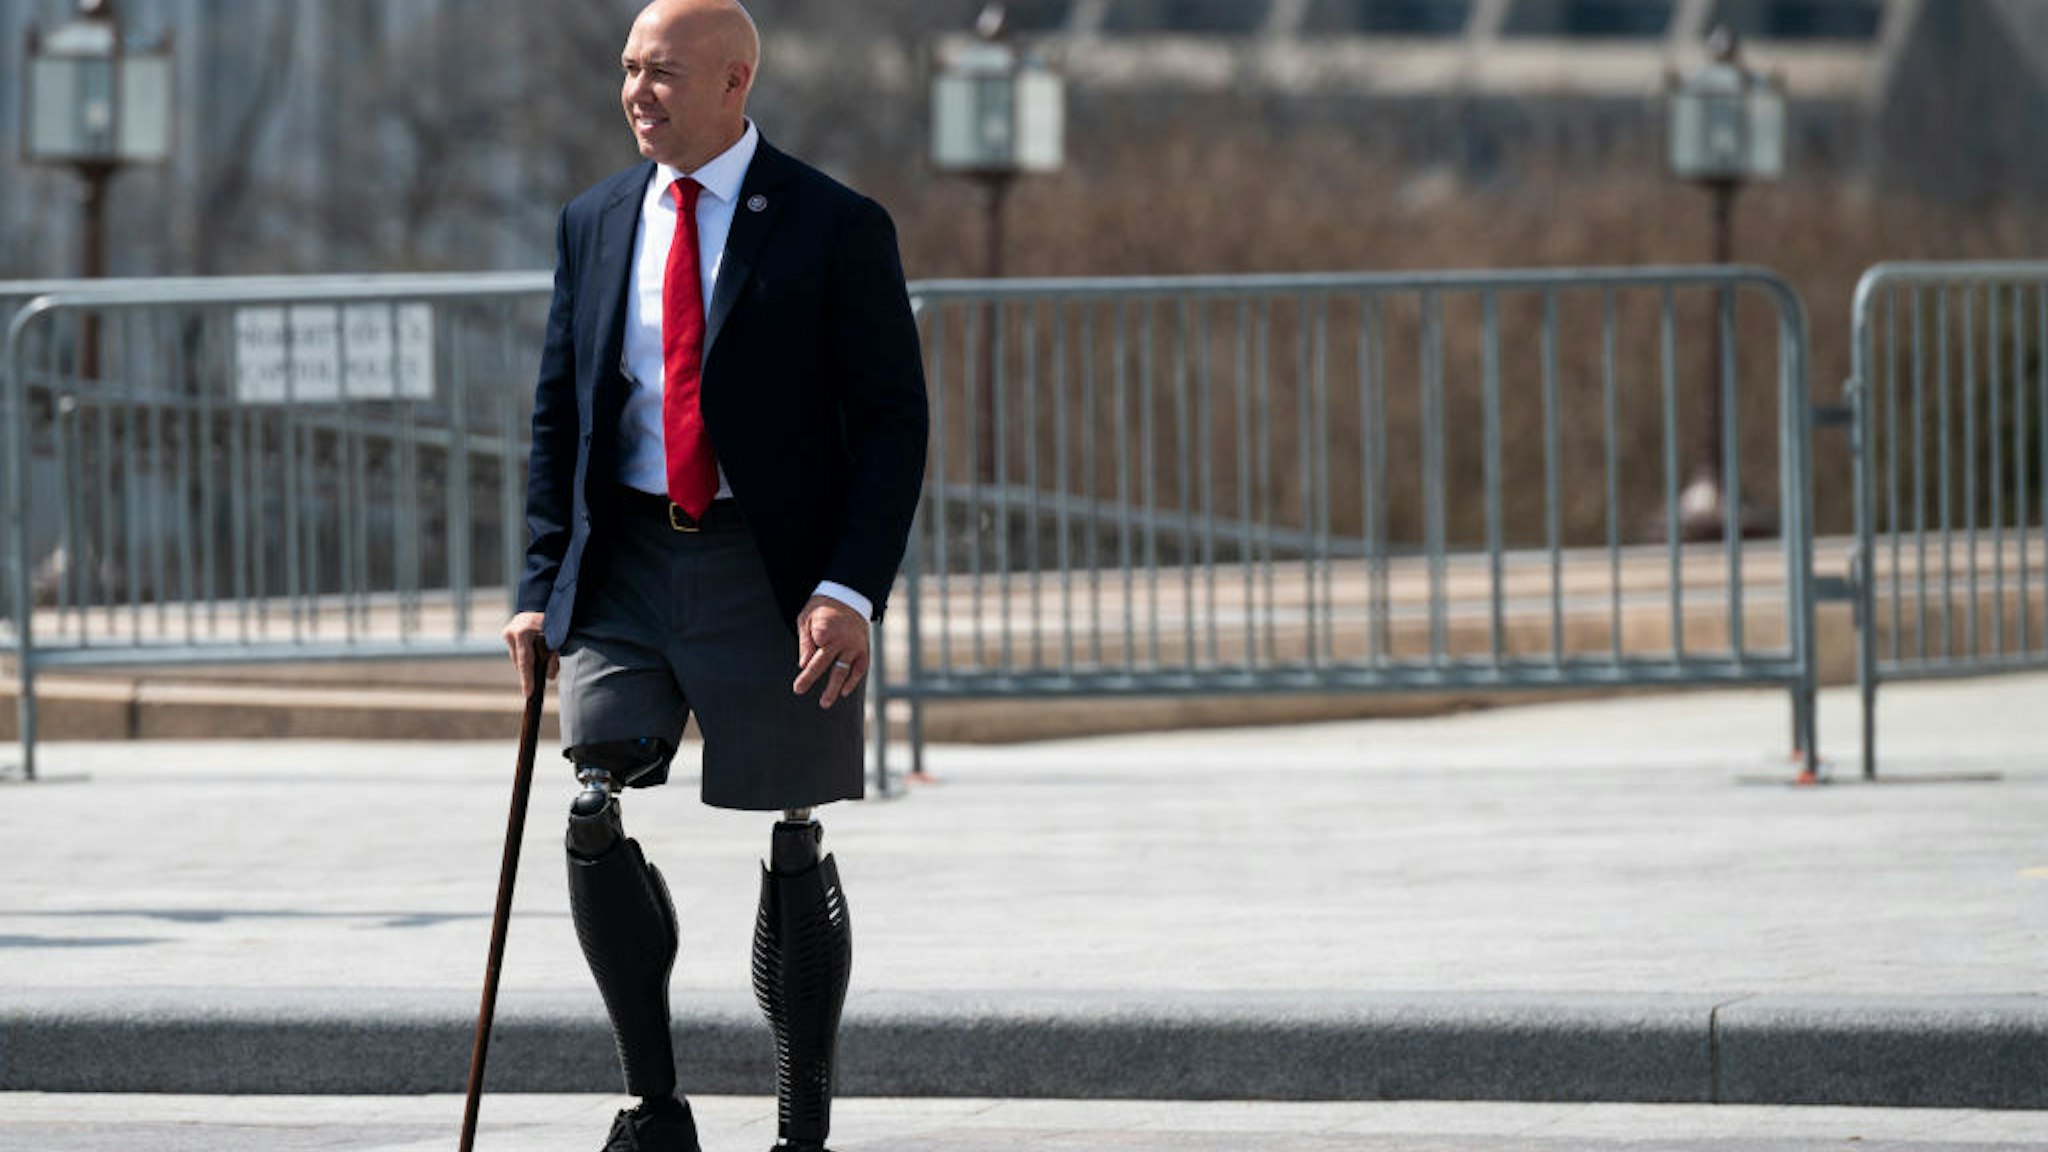 UNITED STATES - MARCH 11: Rep. Brian Mast, R-Fla., leaves the Capitol after a vote on Thursday, March 11, 2021. (Photo By